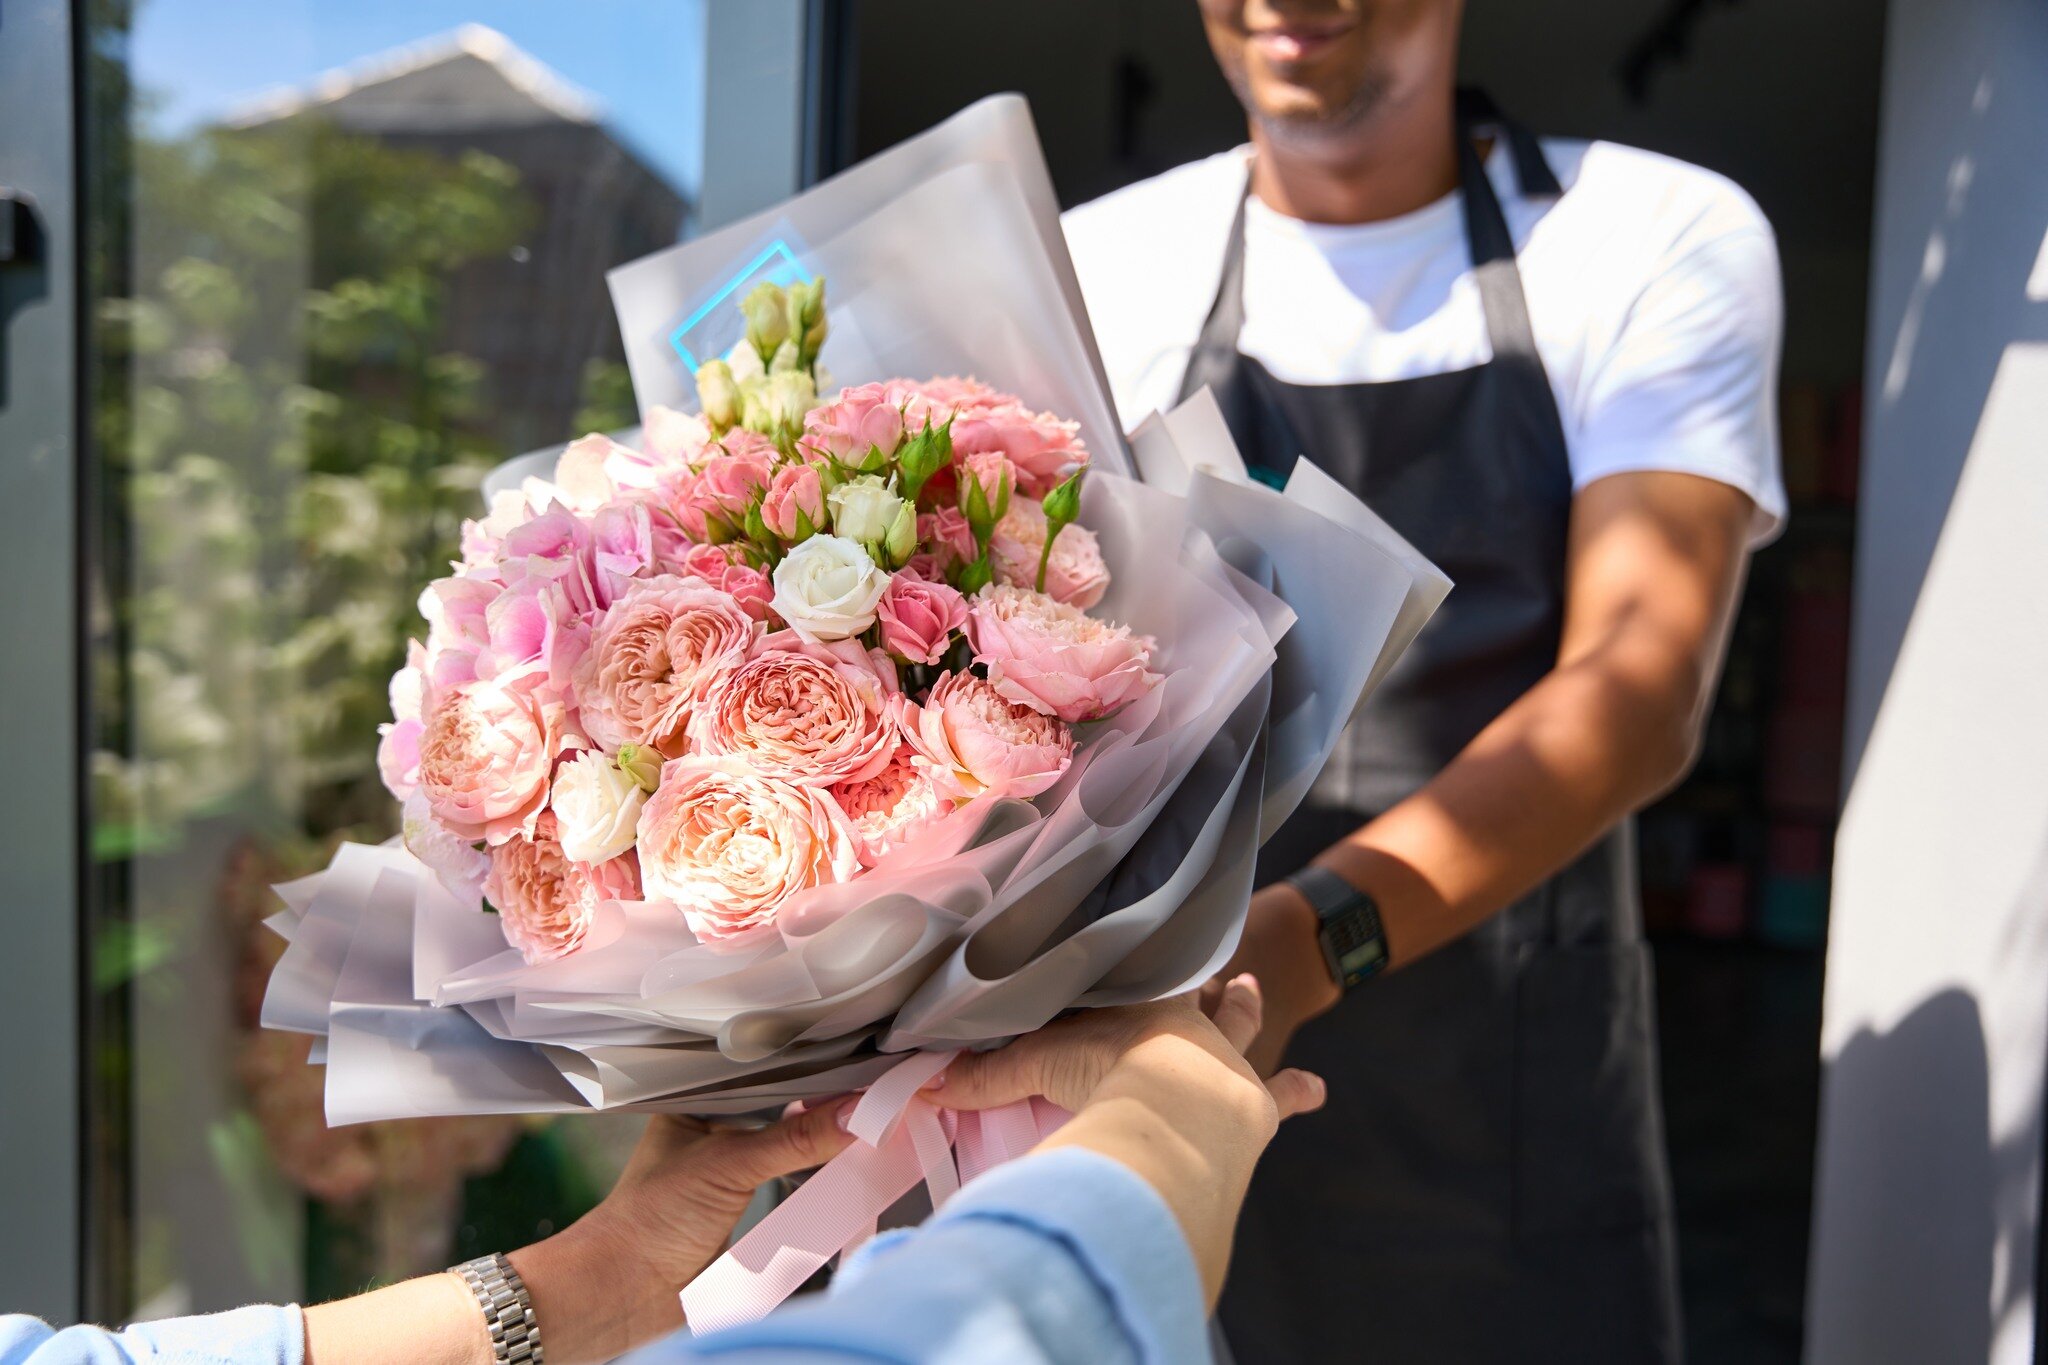 We make it easy to send flowers to your loved ones - we offer pickup and delivery to our local areas! 🚚

Browse our wonderful selection by visiting our website 💐

sofilafleur.com
#westhollywood #beverlyhills #losangeles #fairfax #florists #flowers 